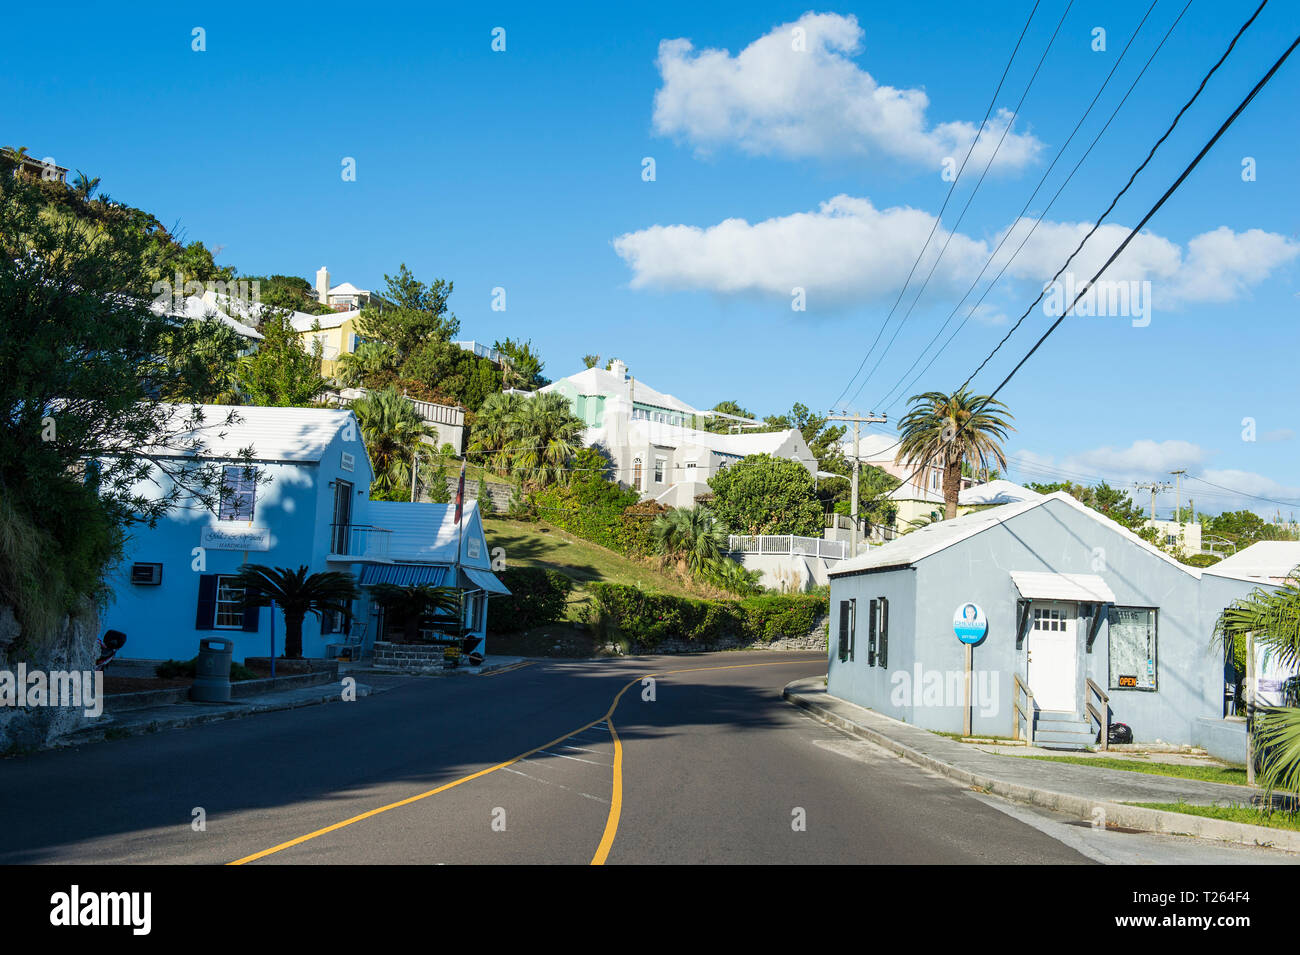 Bermuda, St. George's, Colonial houses and street Stock Photo